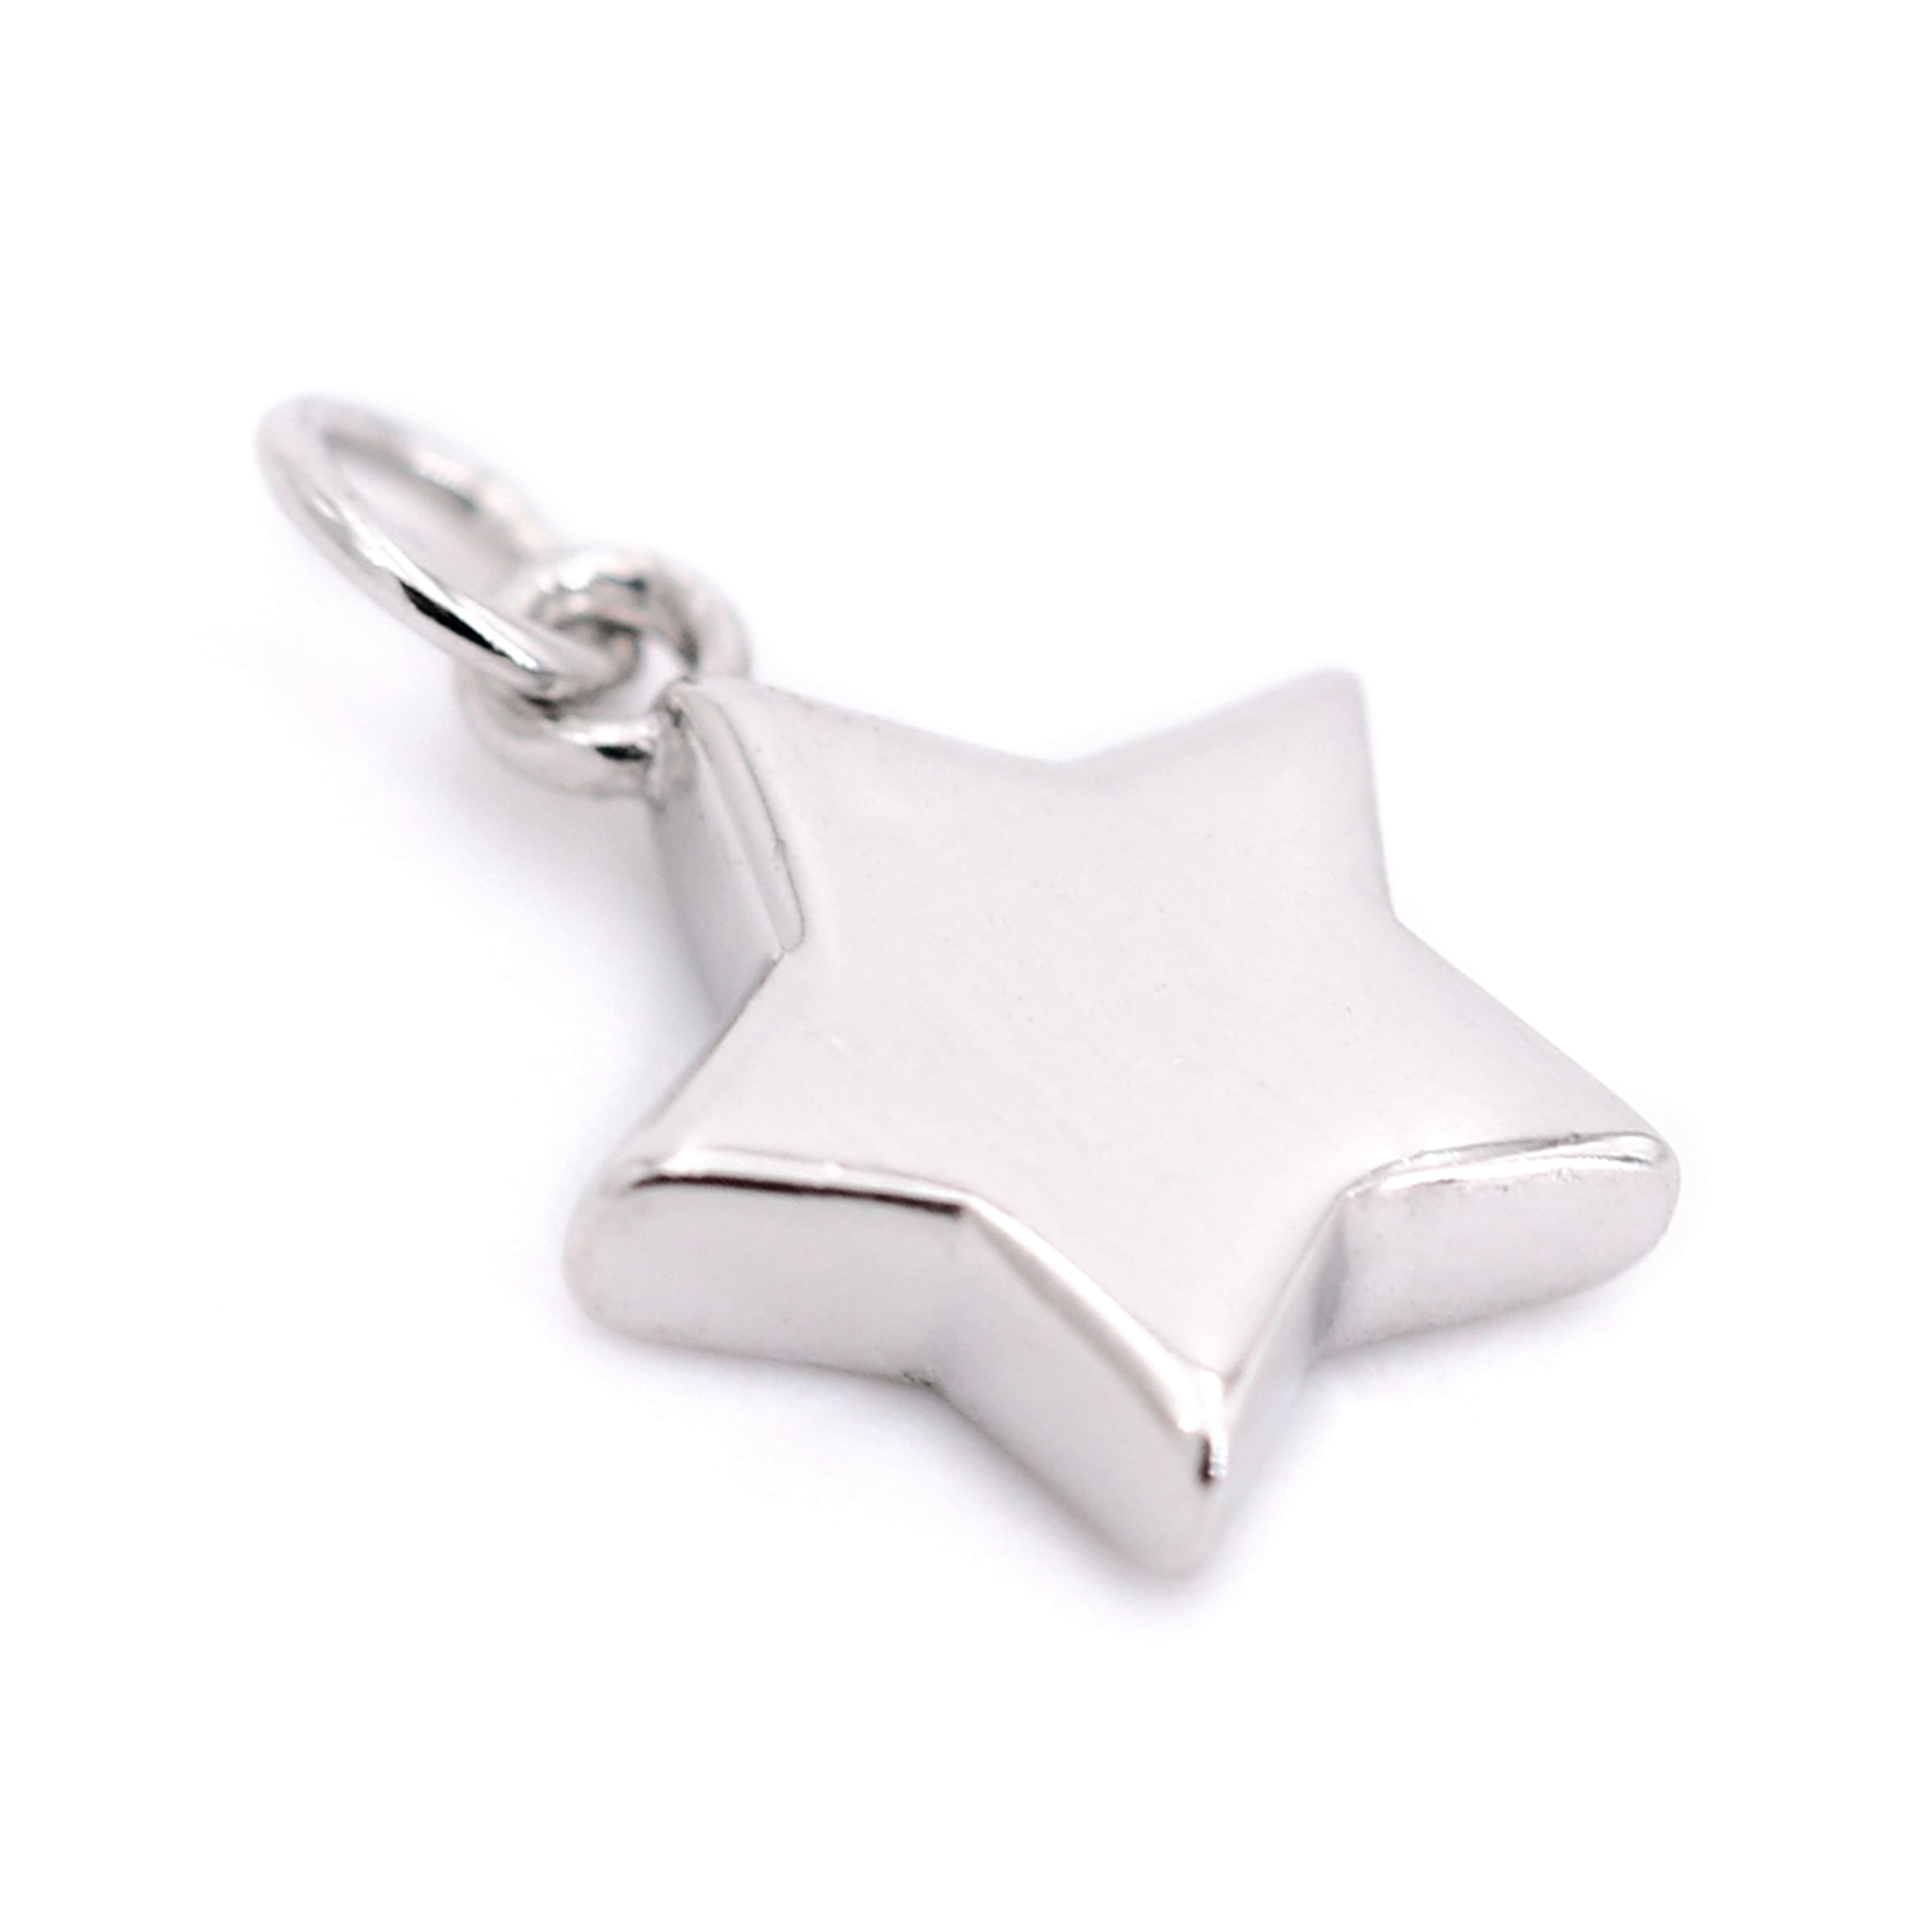 Sterling Silver Star Icon Charm by Bead Landing&#x2122;